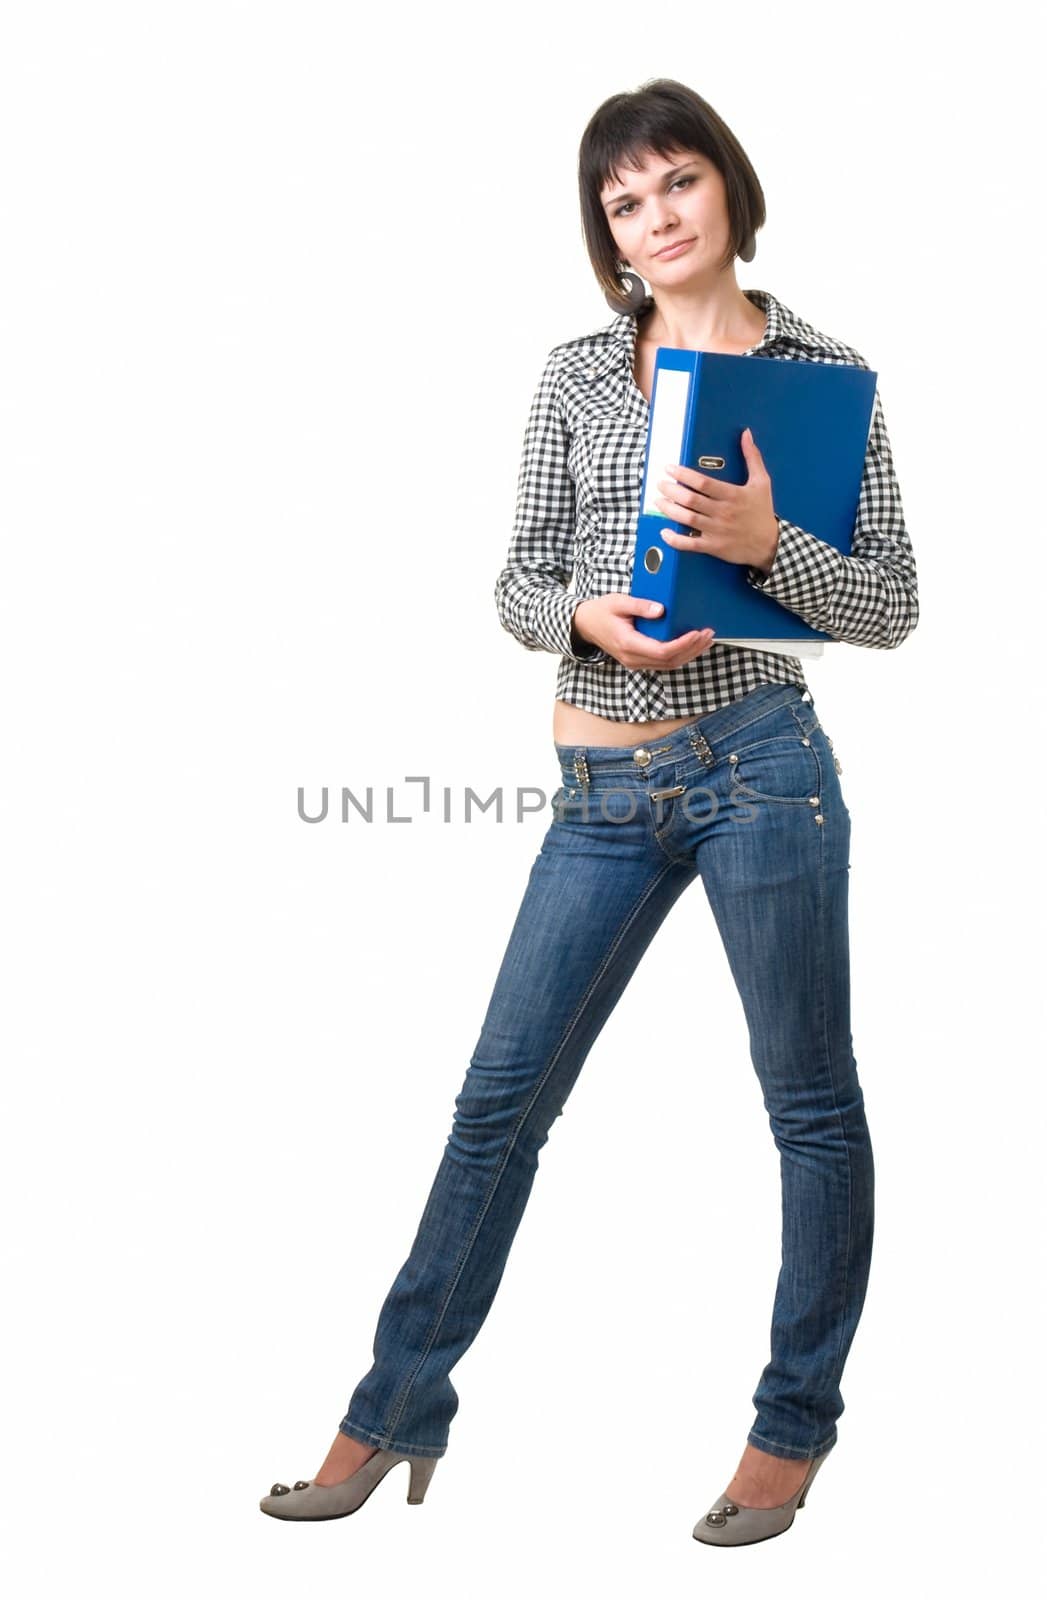 Charming student with file standing against isolated white background